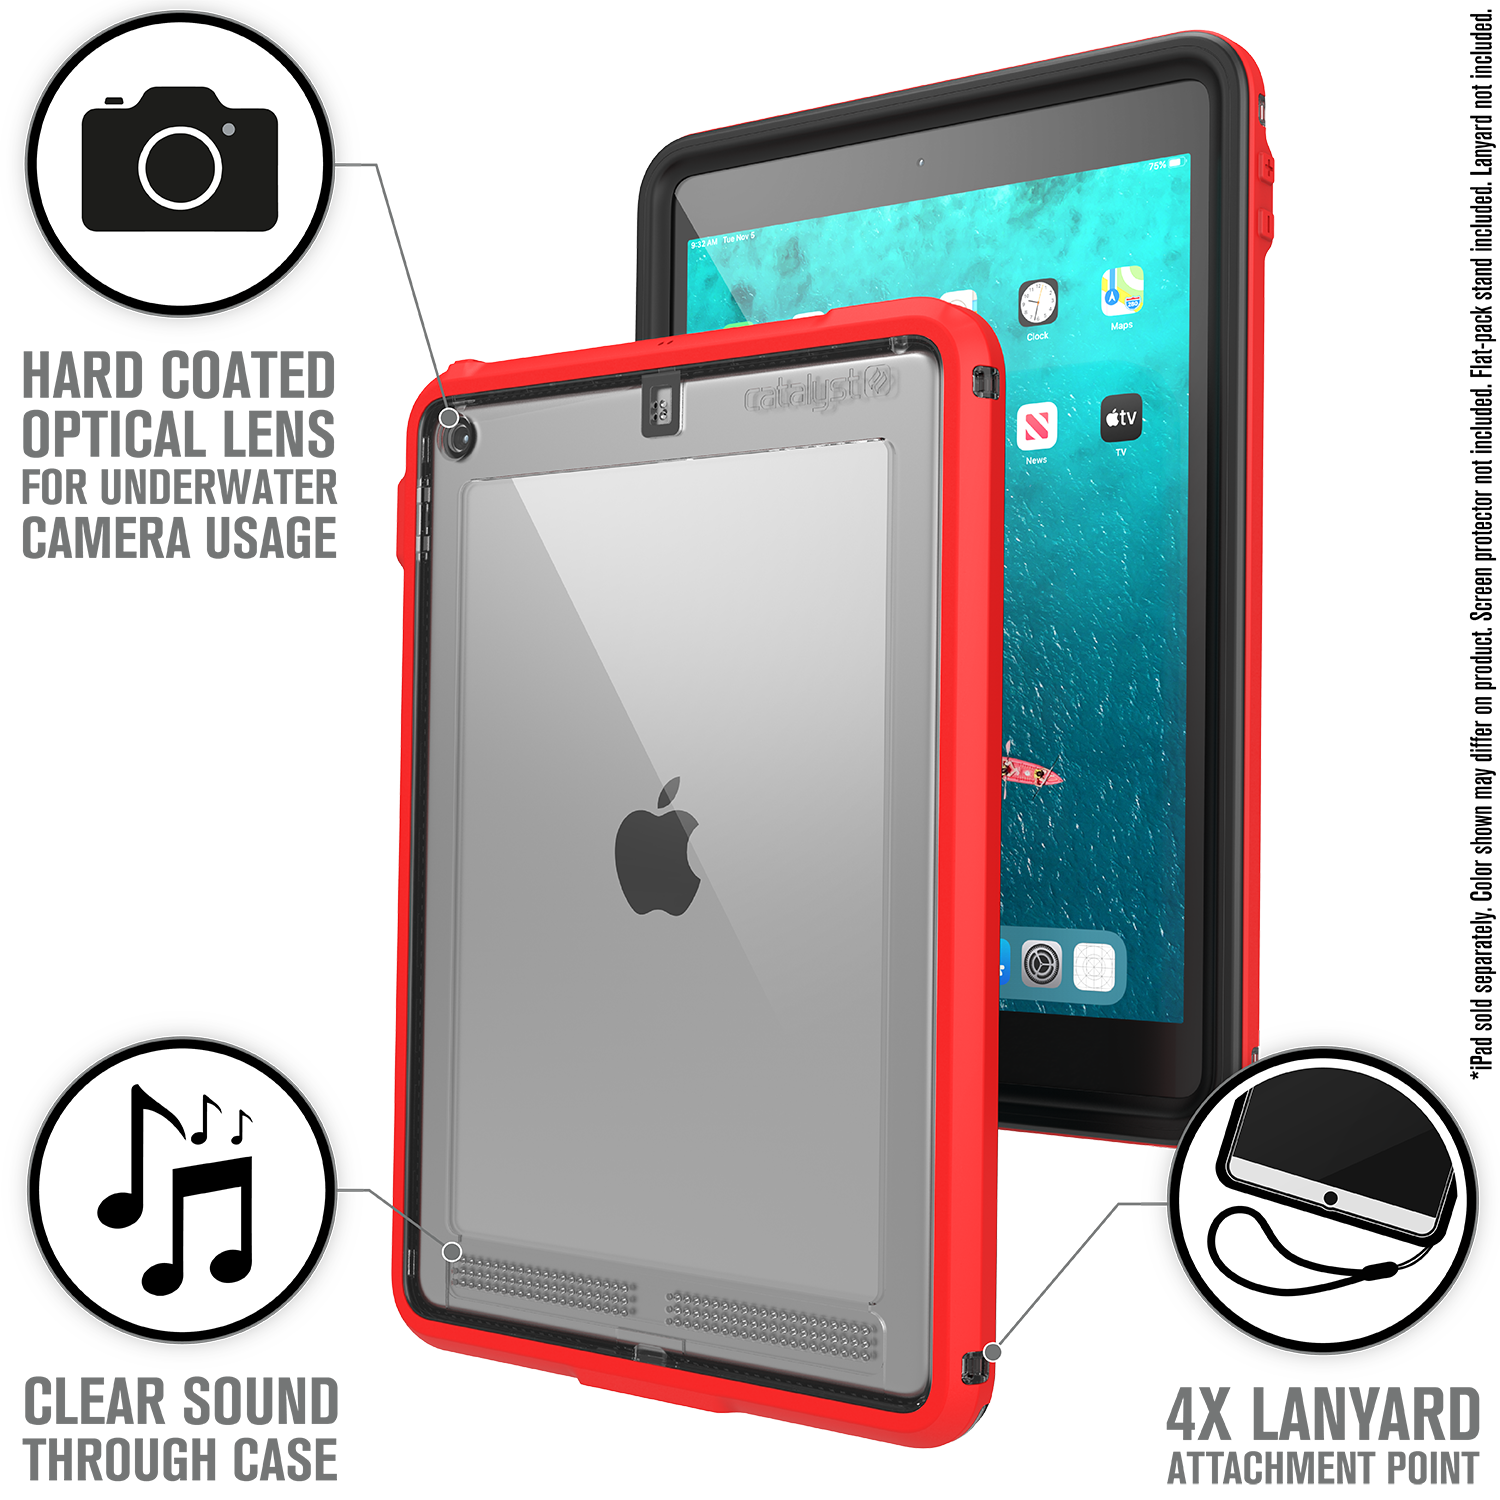 CATIPD7THRED | Waterproof Case for 10.2" iPad (2019)